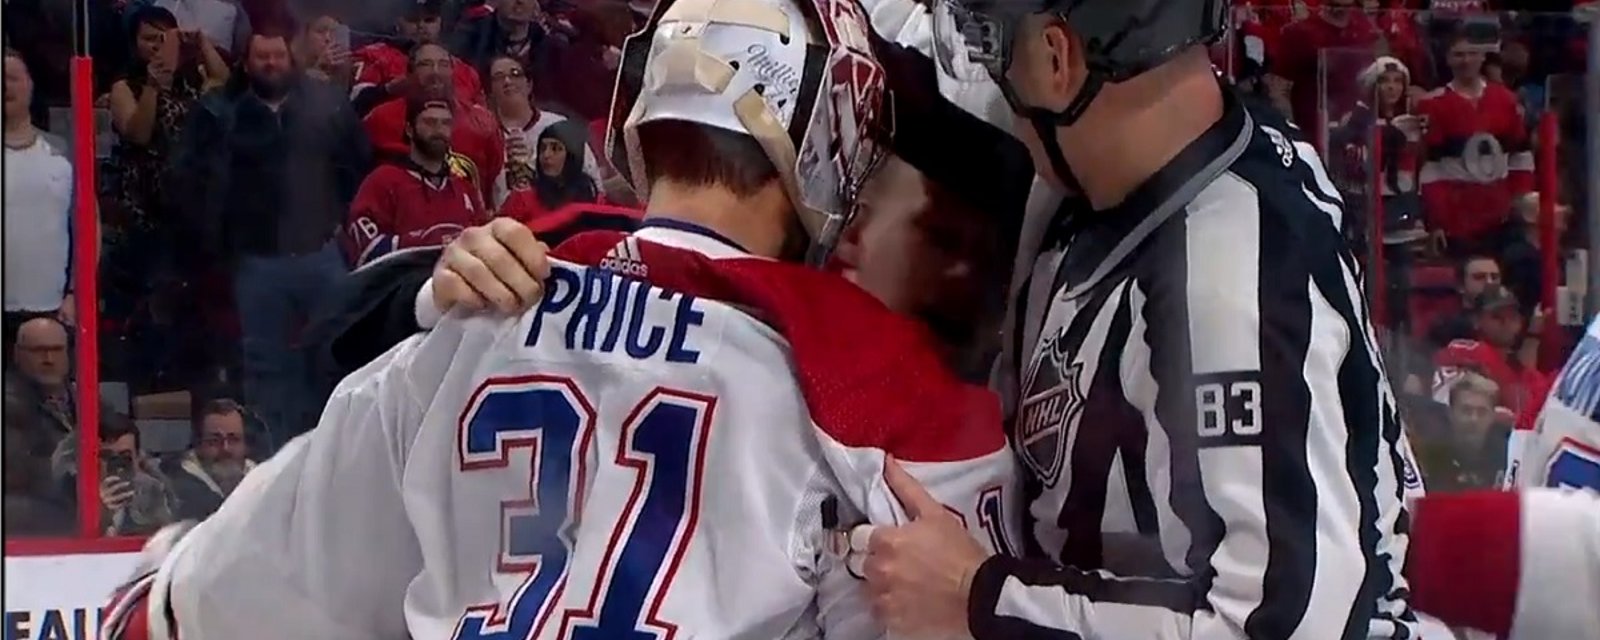 Carey Price attacks Brady Tkachuk after the whistle and has to be restrained by NHL officials.